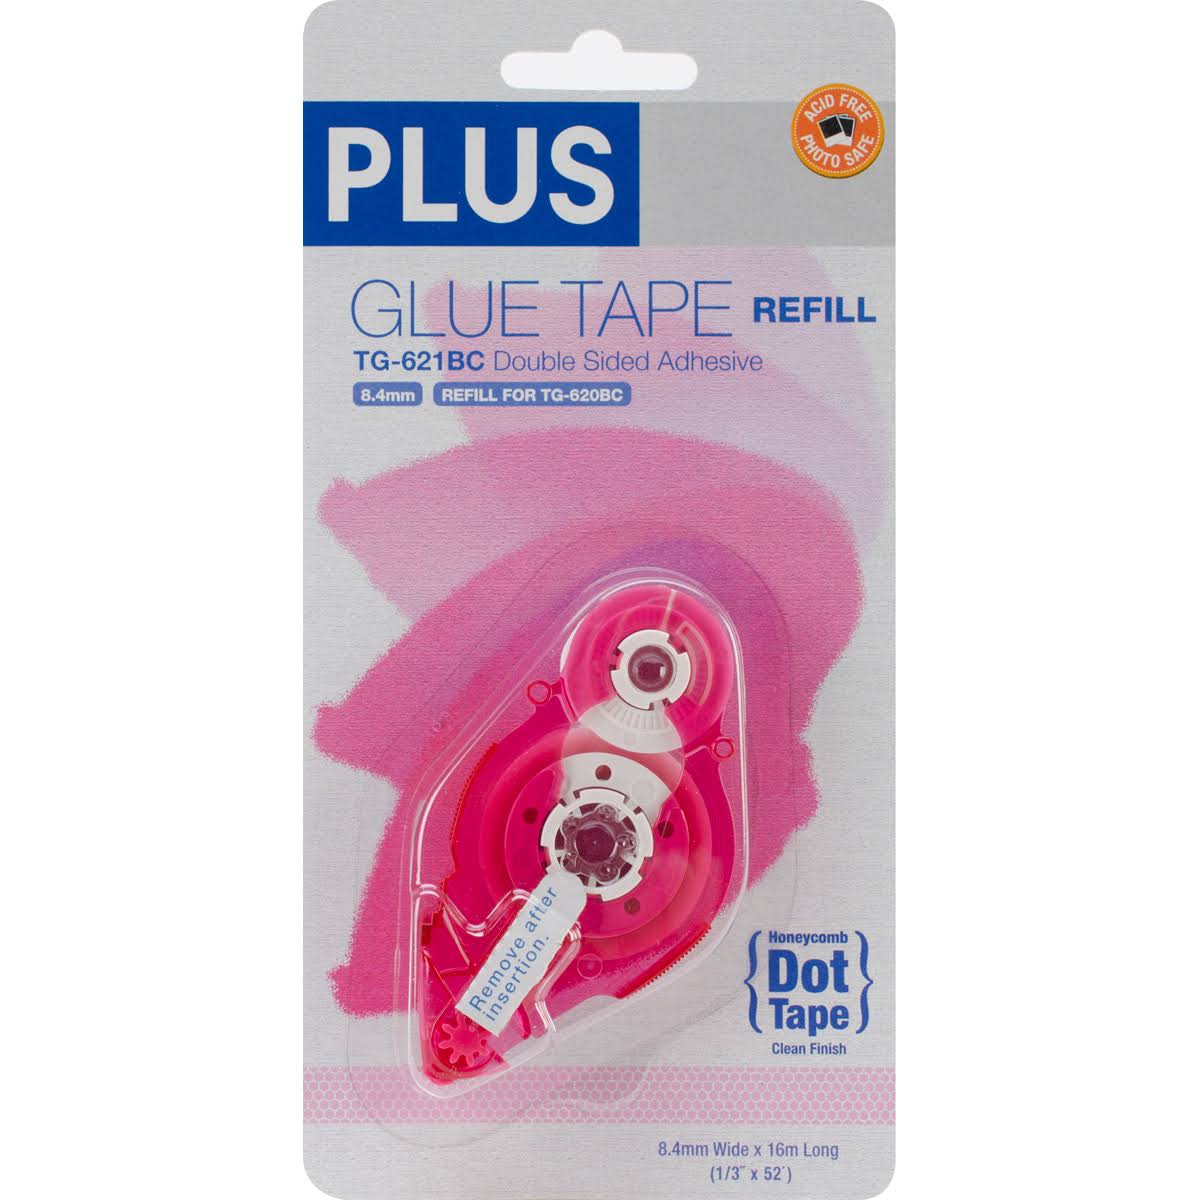 Plus Permanent Honeycomb Glue Tape Refill .33"X52.5', For Use In 620BC